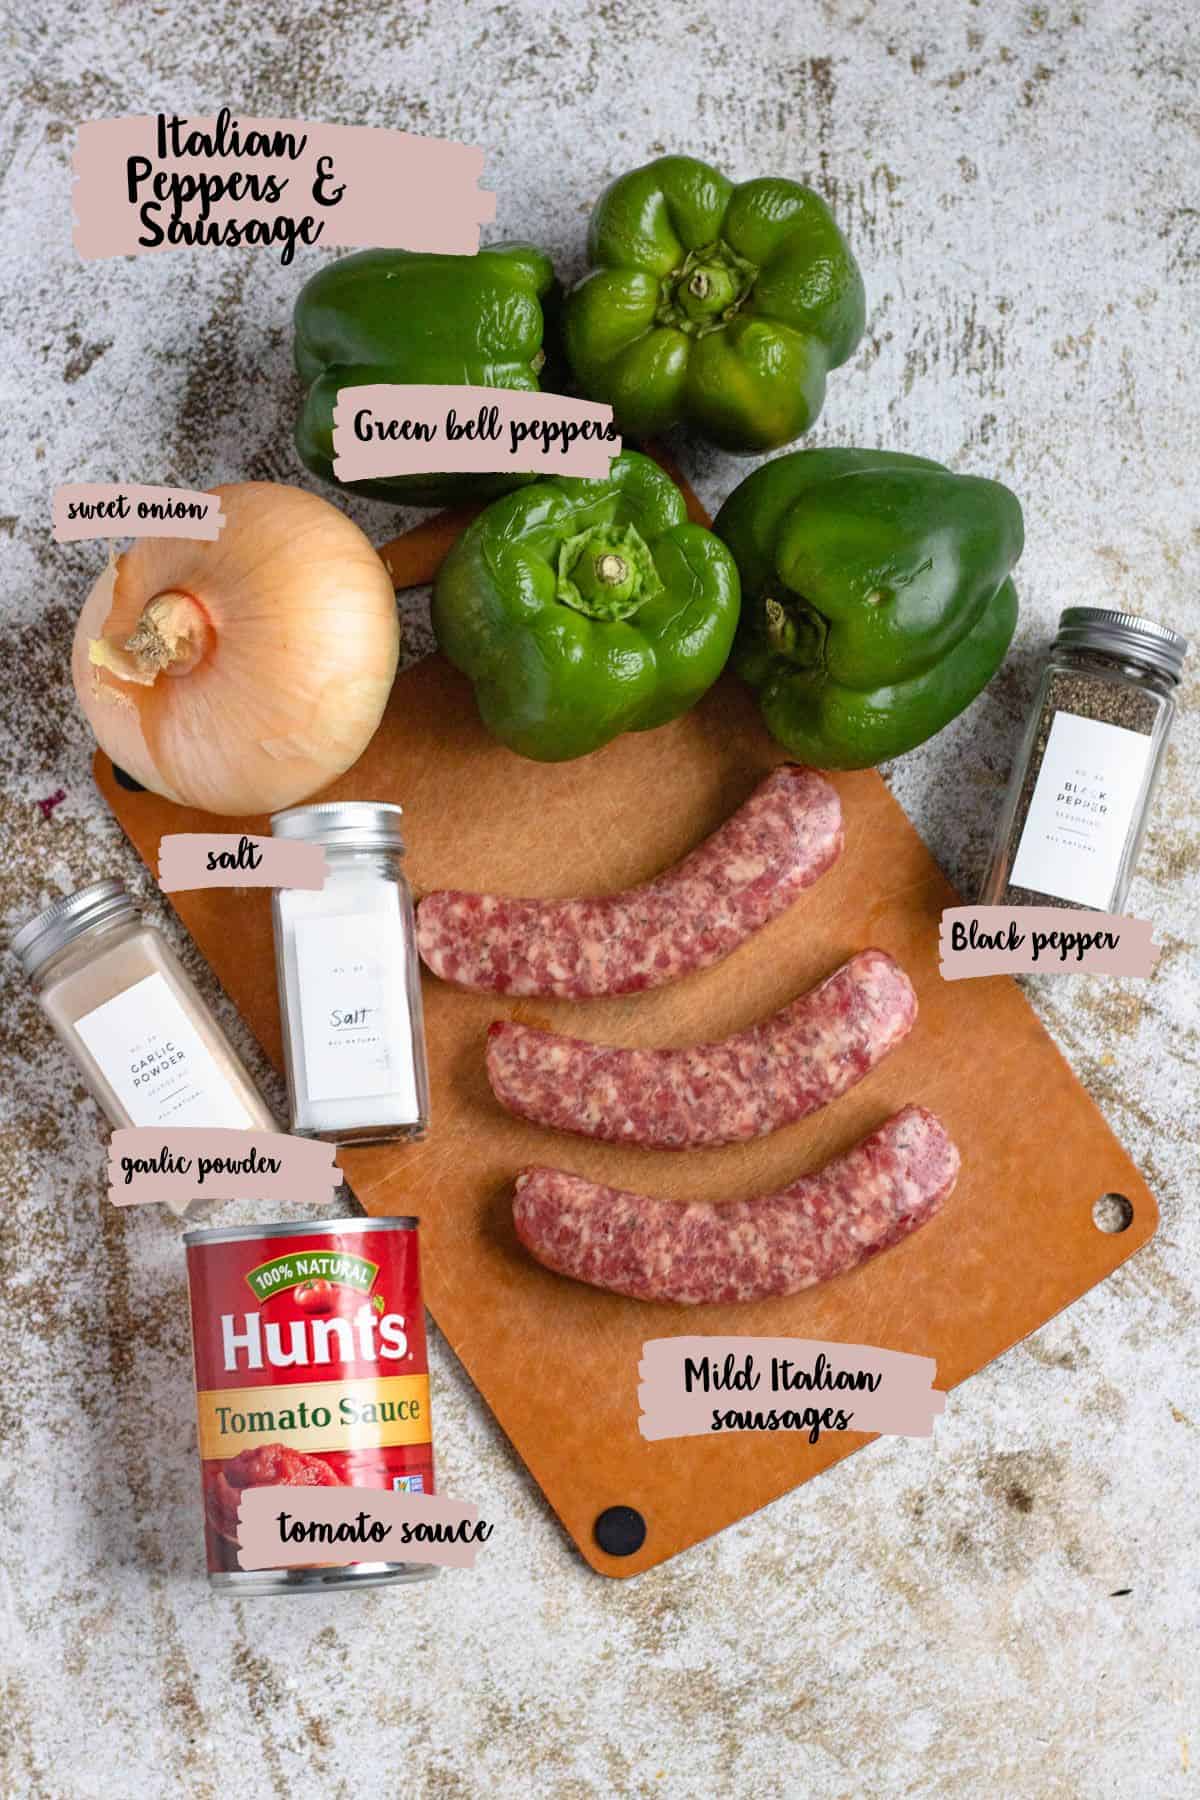 Ingredients shown are used to prepare authentic italian sausage and peppers. 